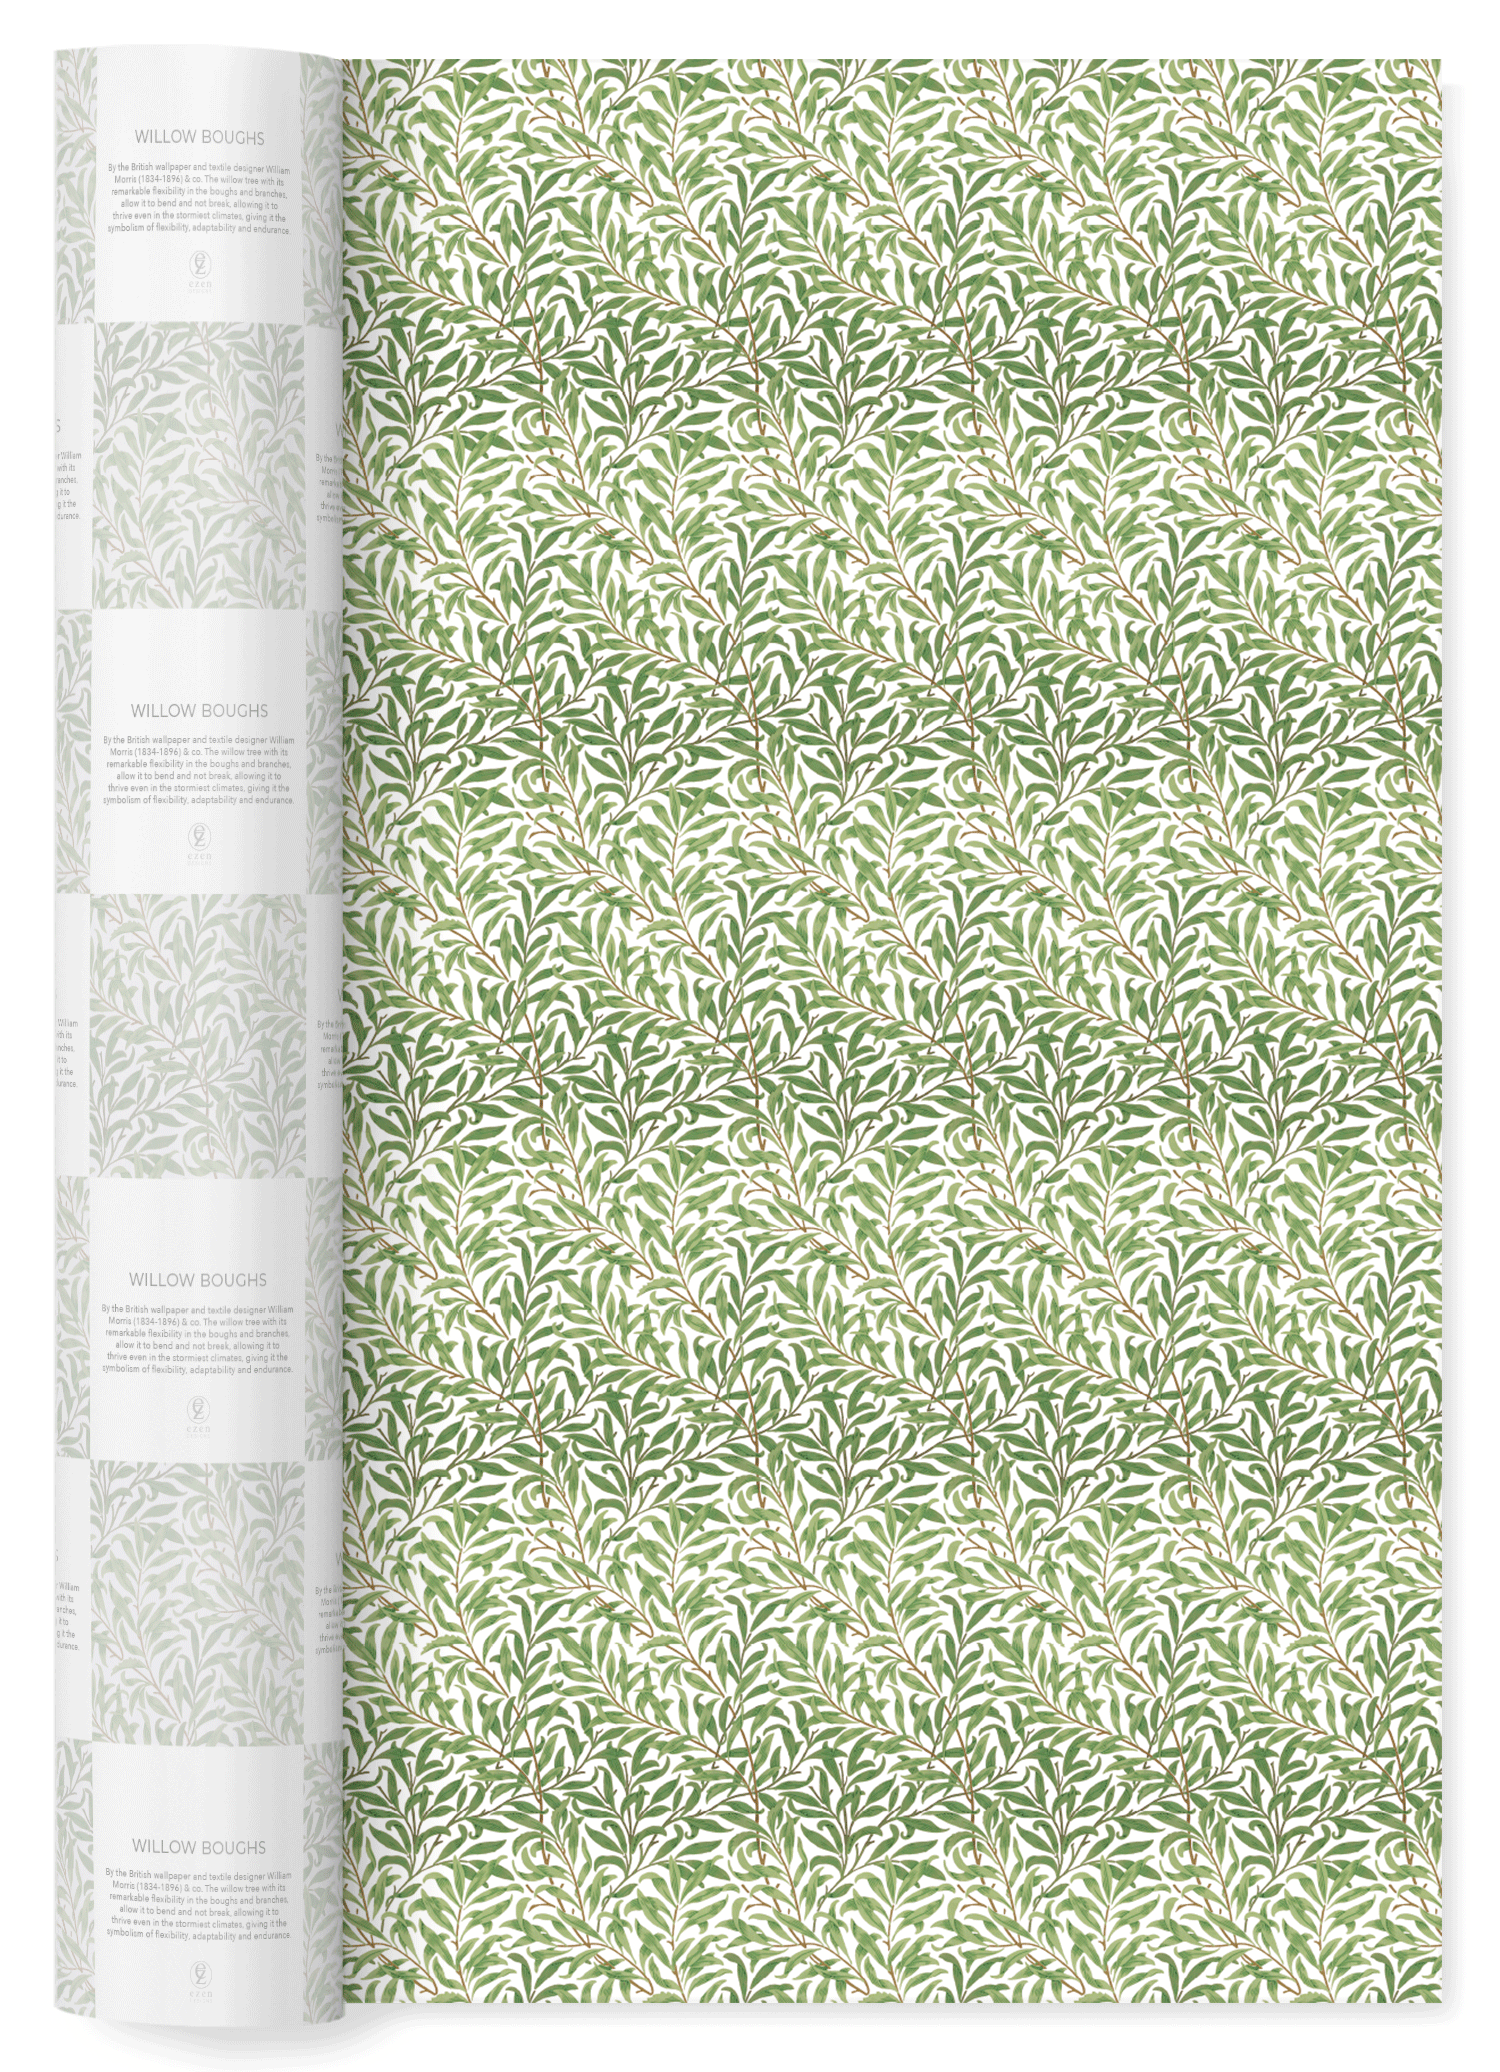 WILLOW BOUGHS: Wrapping Paper